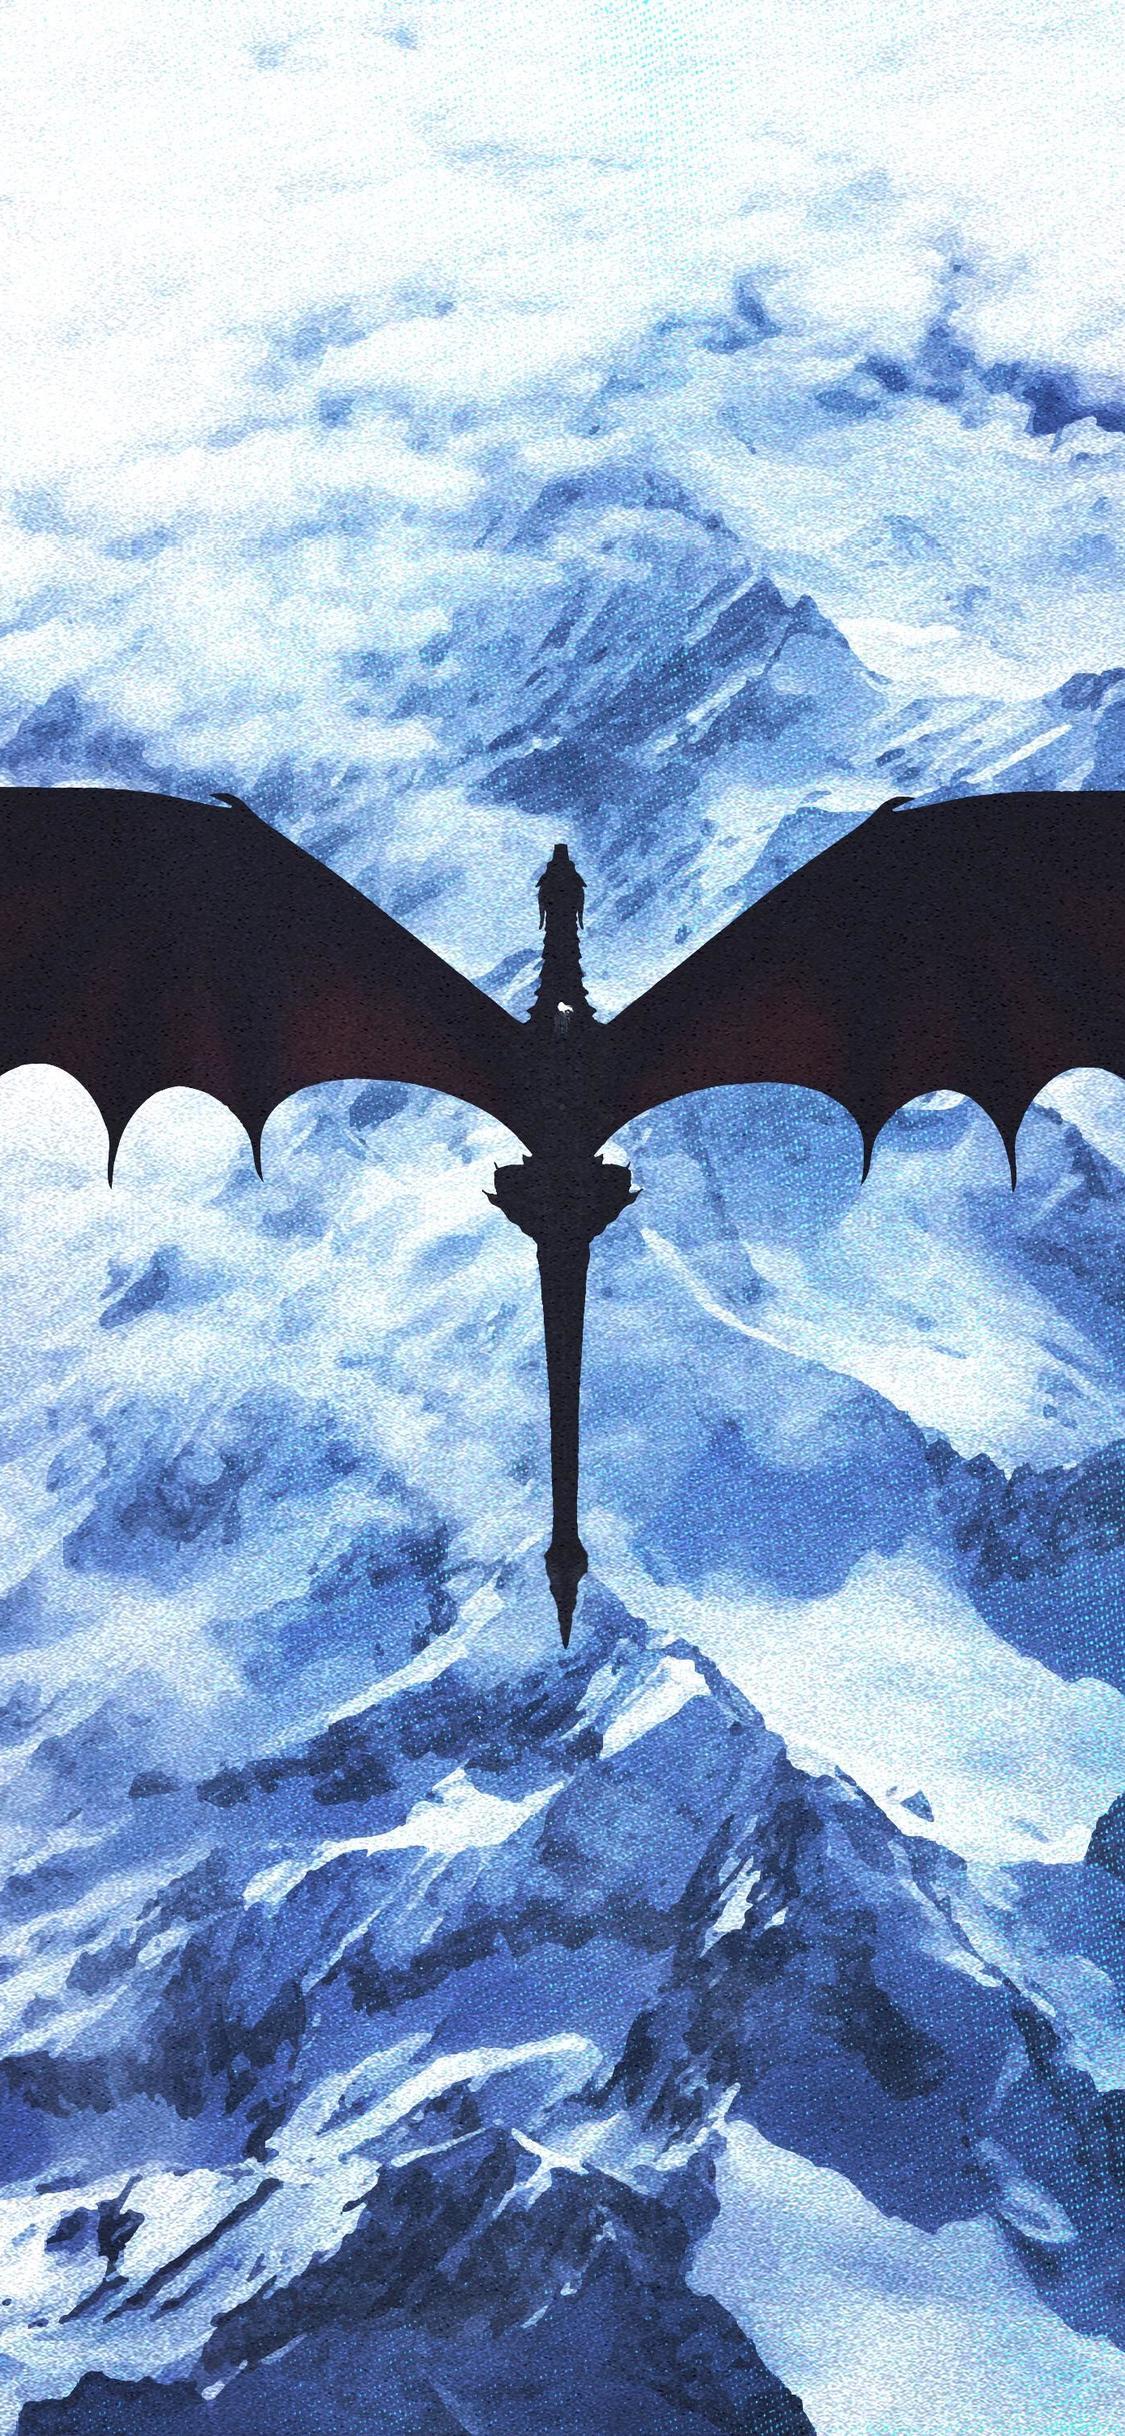 Dragon Game Of Thrones Iphone Wallpapers Top Free Dragon Game Of